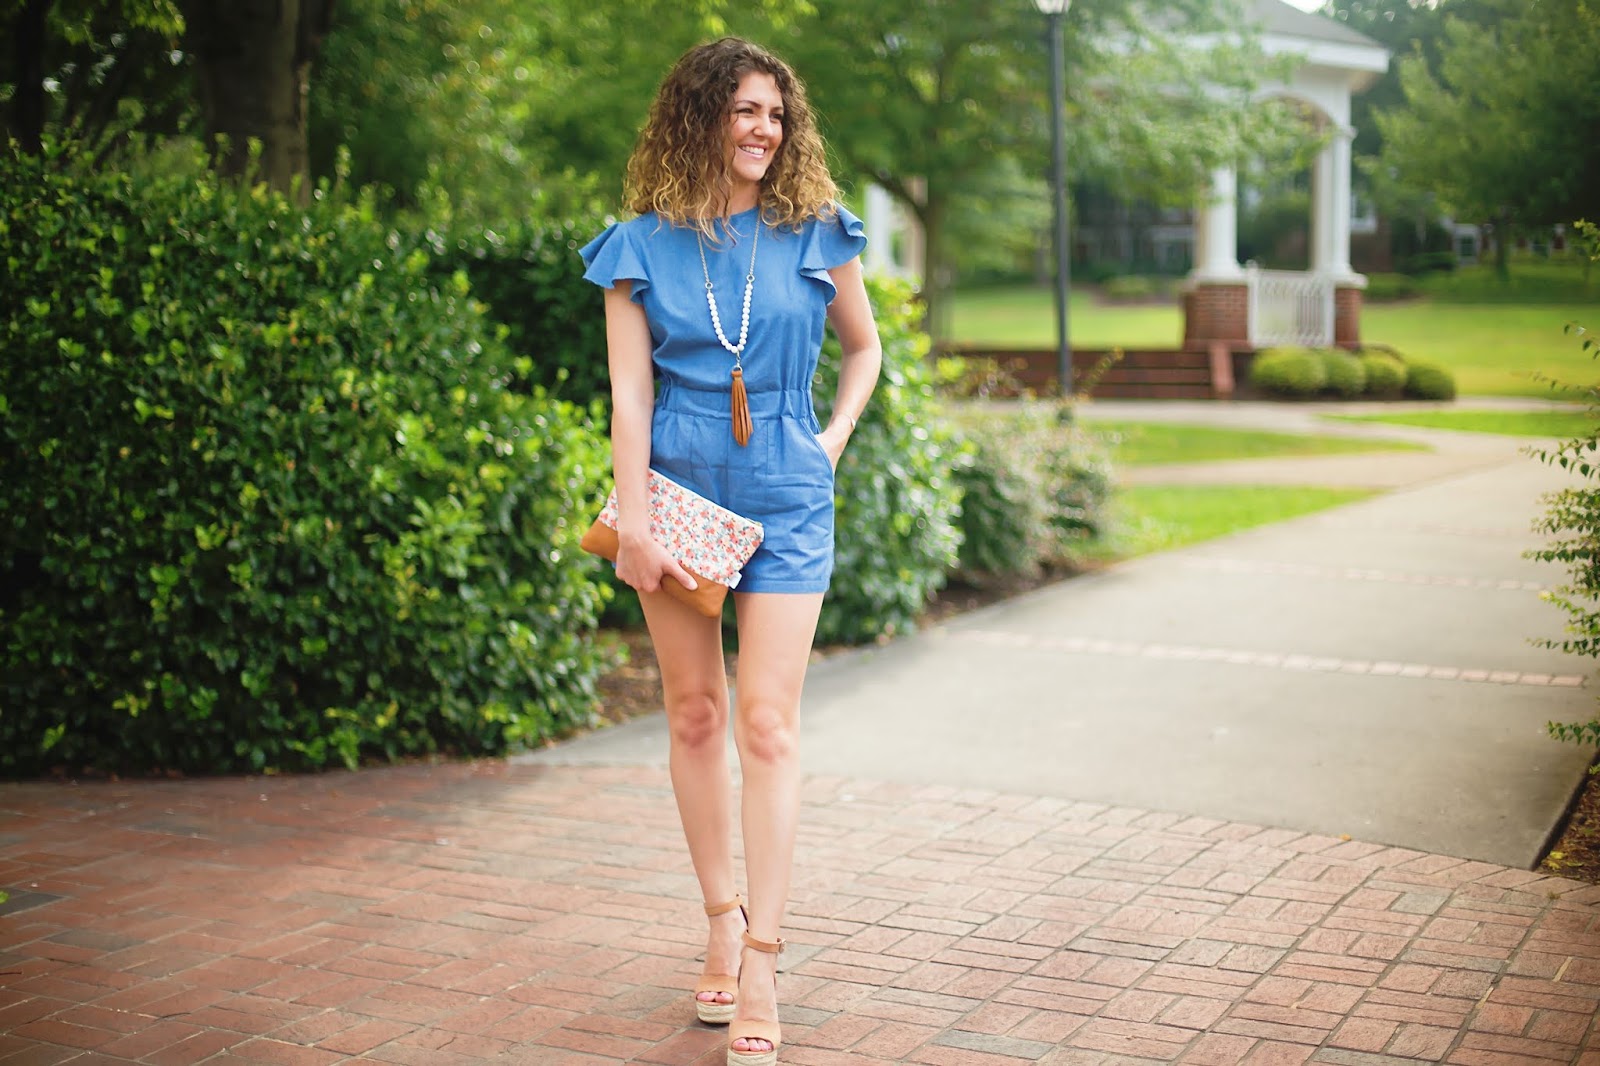 Jenn Pennell, Shaw Avenue blog, wears a denim romper from Amazon, Steve Madden scalloped wedges, floral clutch, and leather necklace.